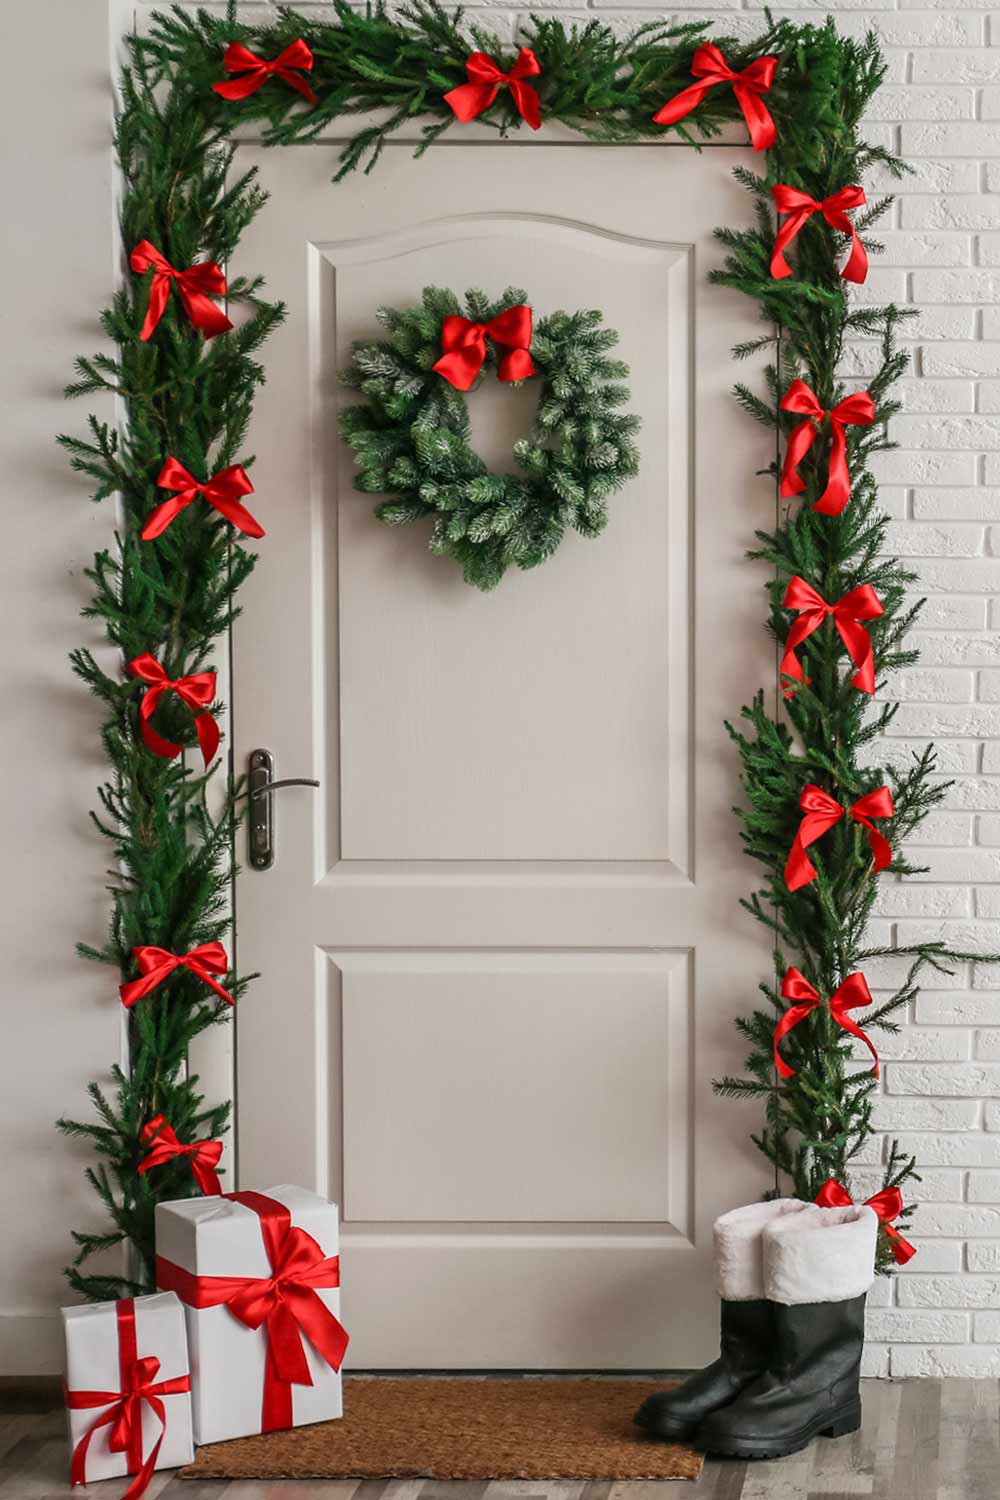 Christmas Decoration for Door with a Wreath